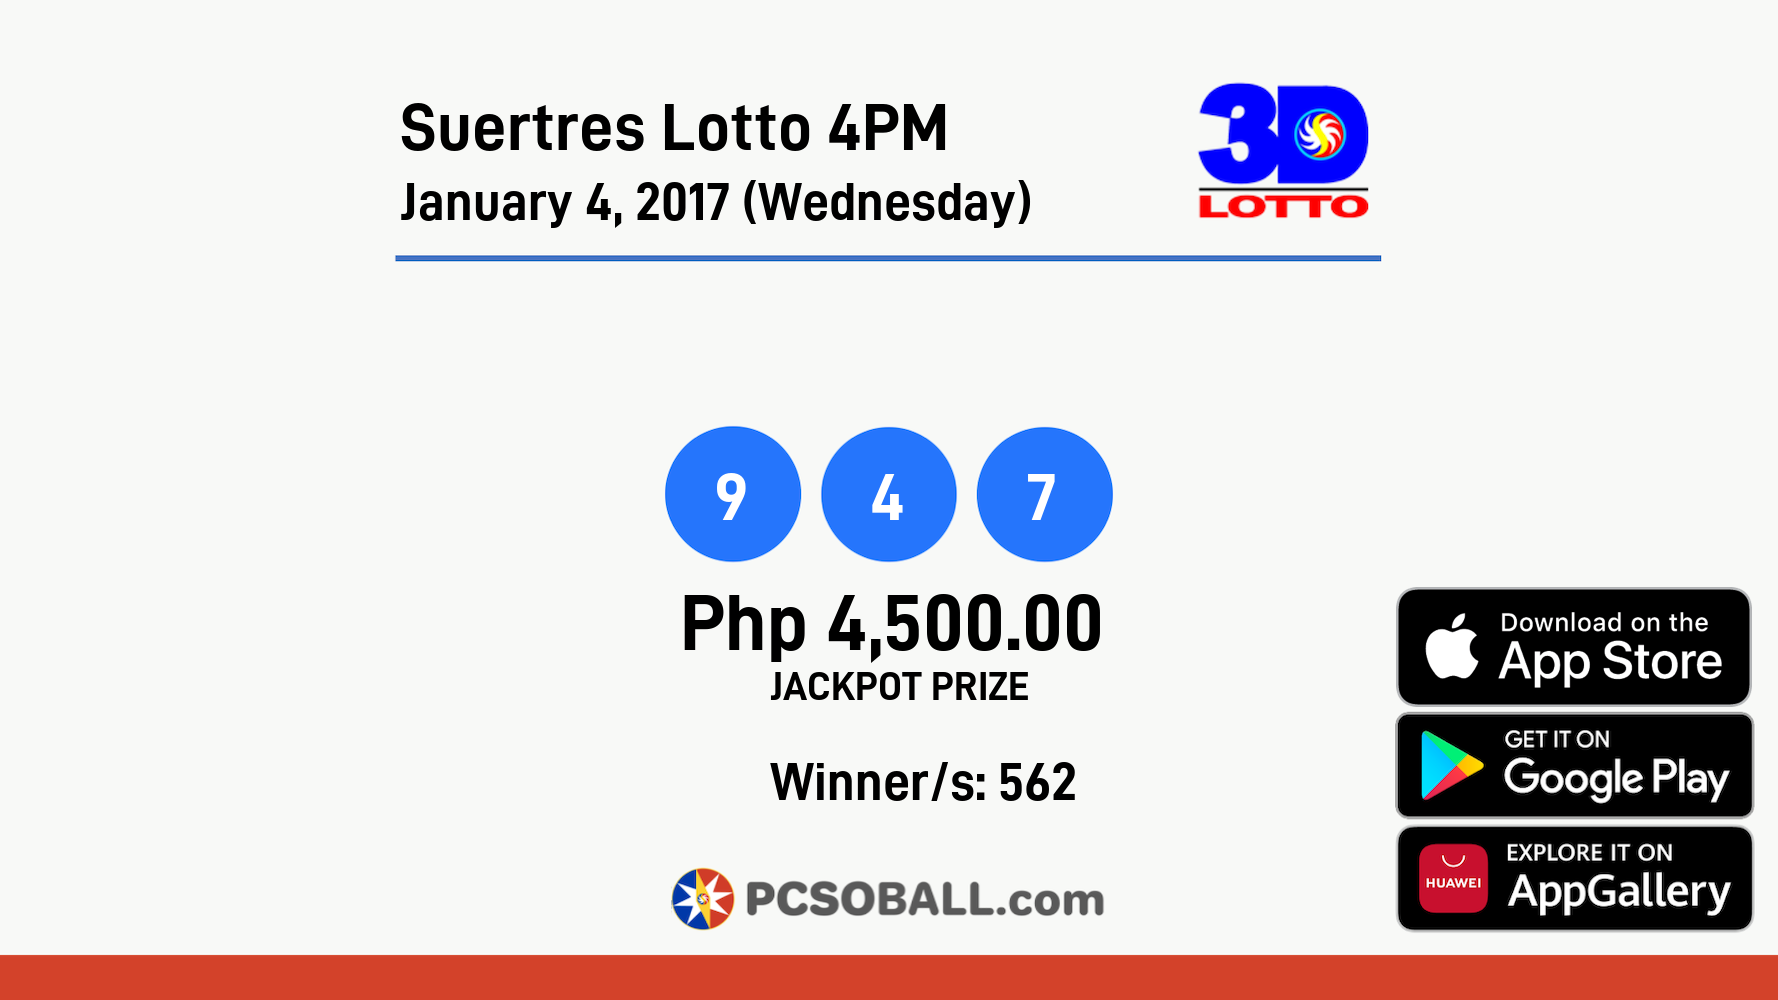 Suertres Lotto 4PM January 4, 2017 (Wednesday) Result